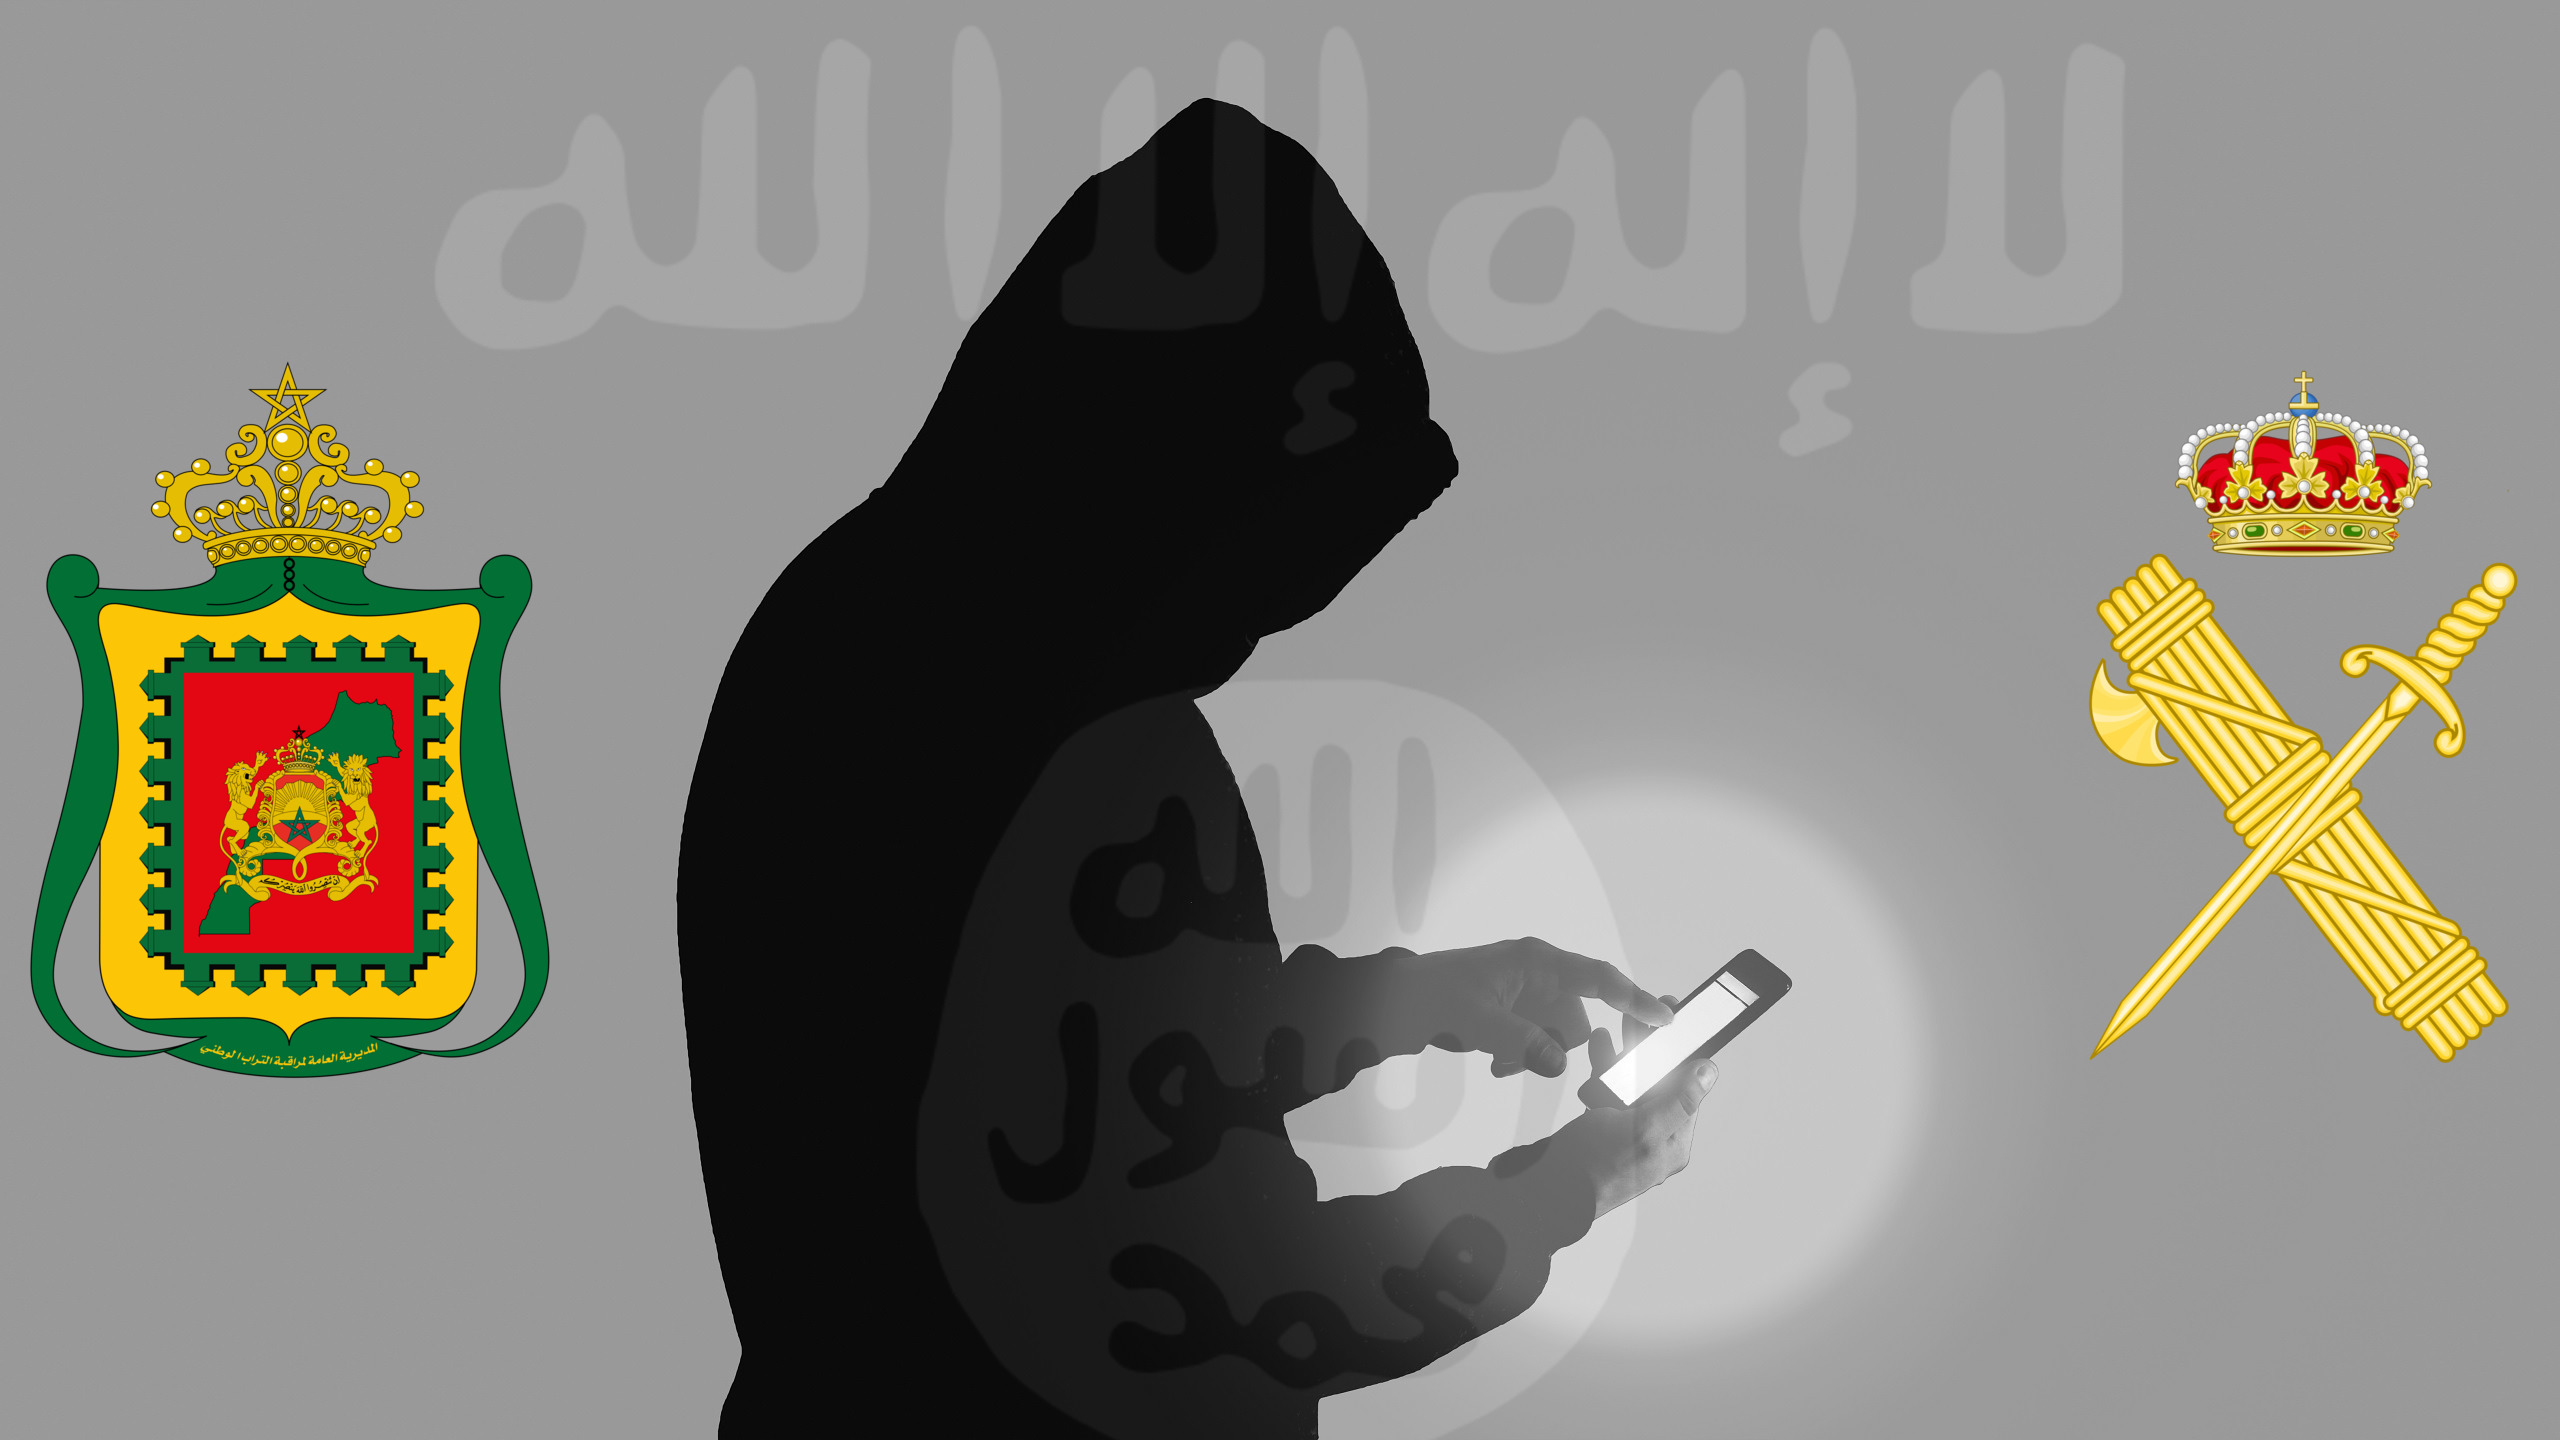 Online Jihadism: Authorities Disrupt an Islamic State Youth Recruiting Network in Spain